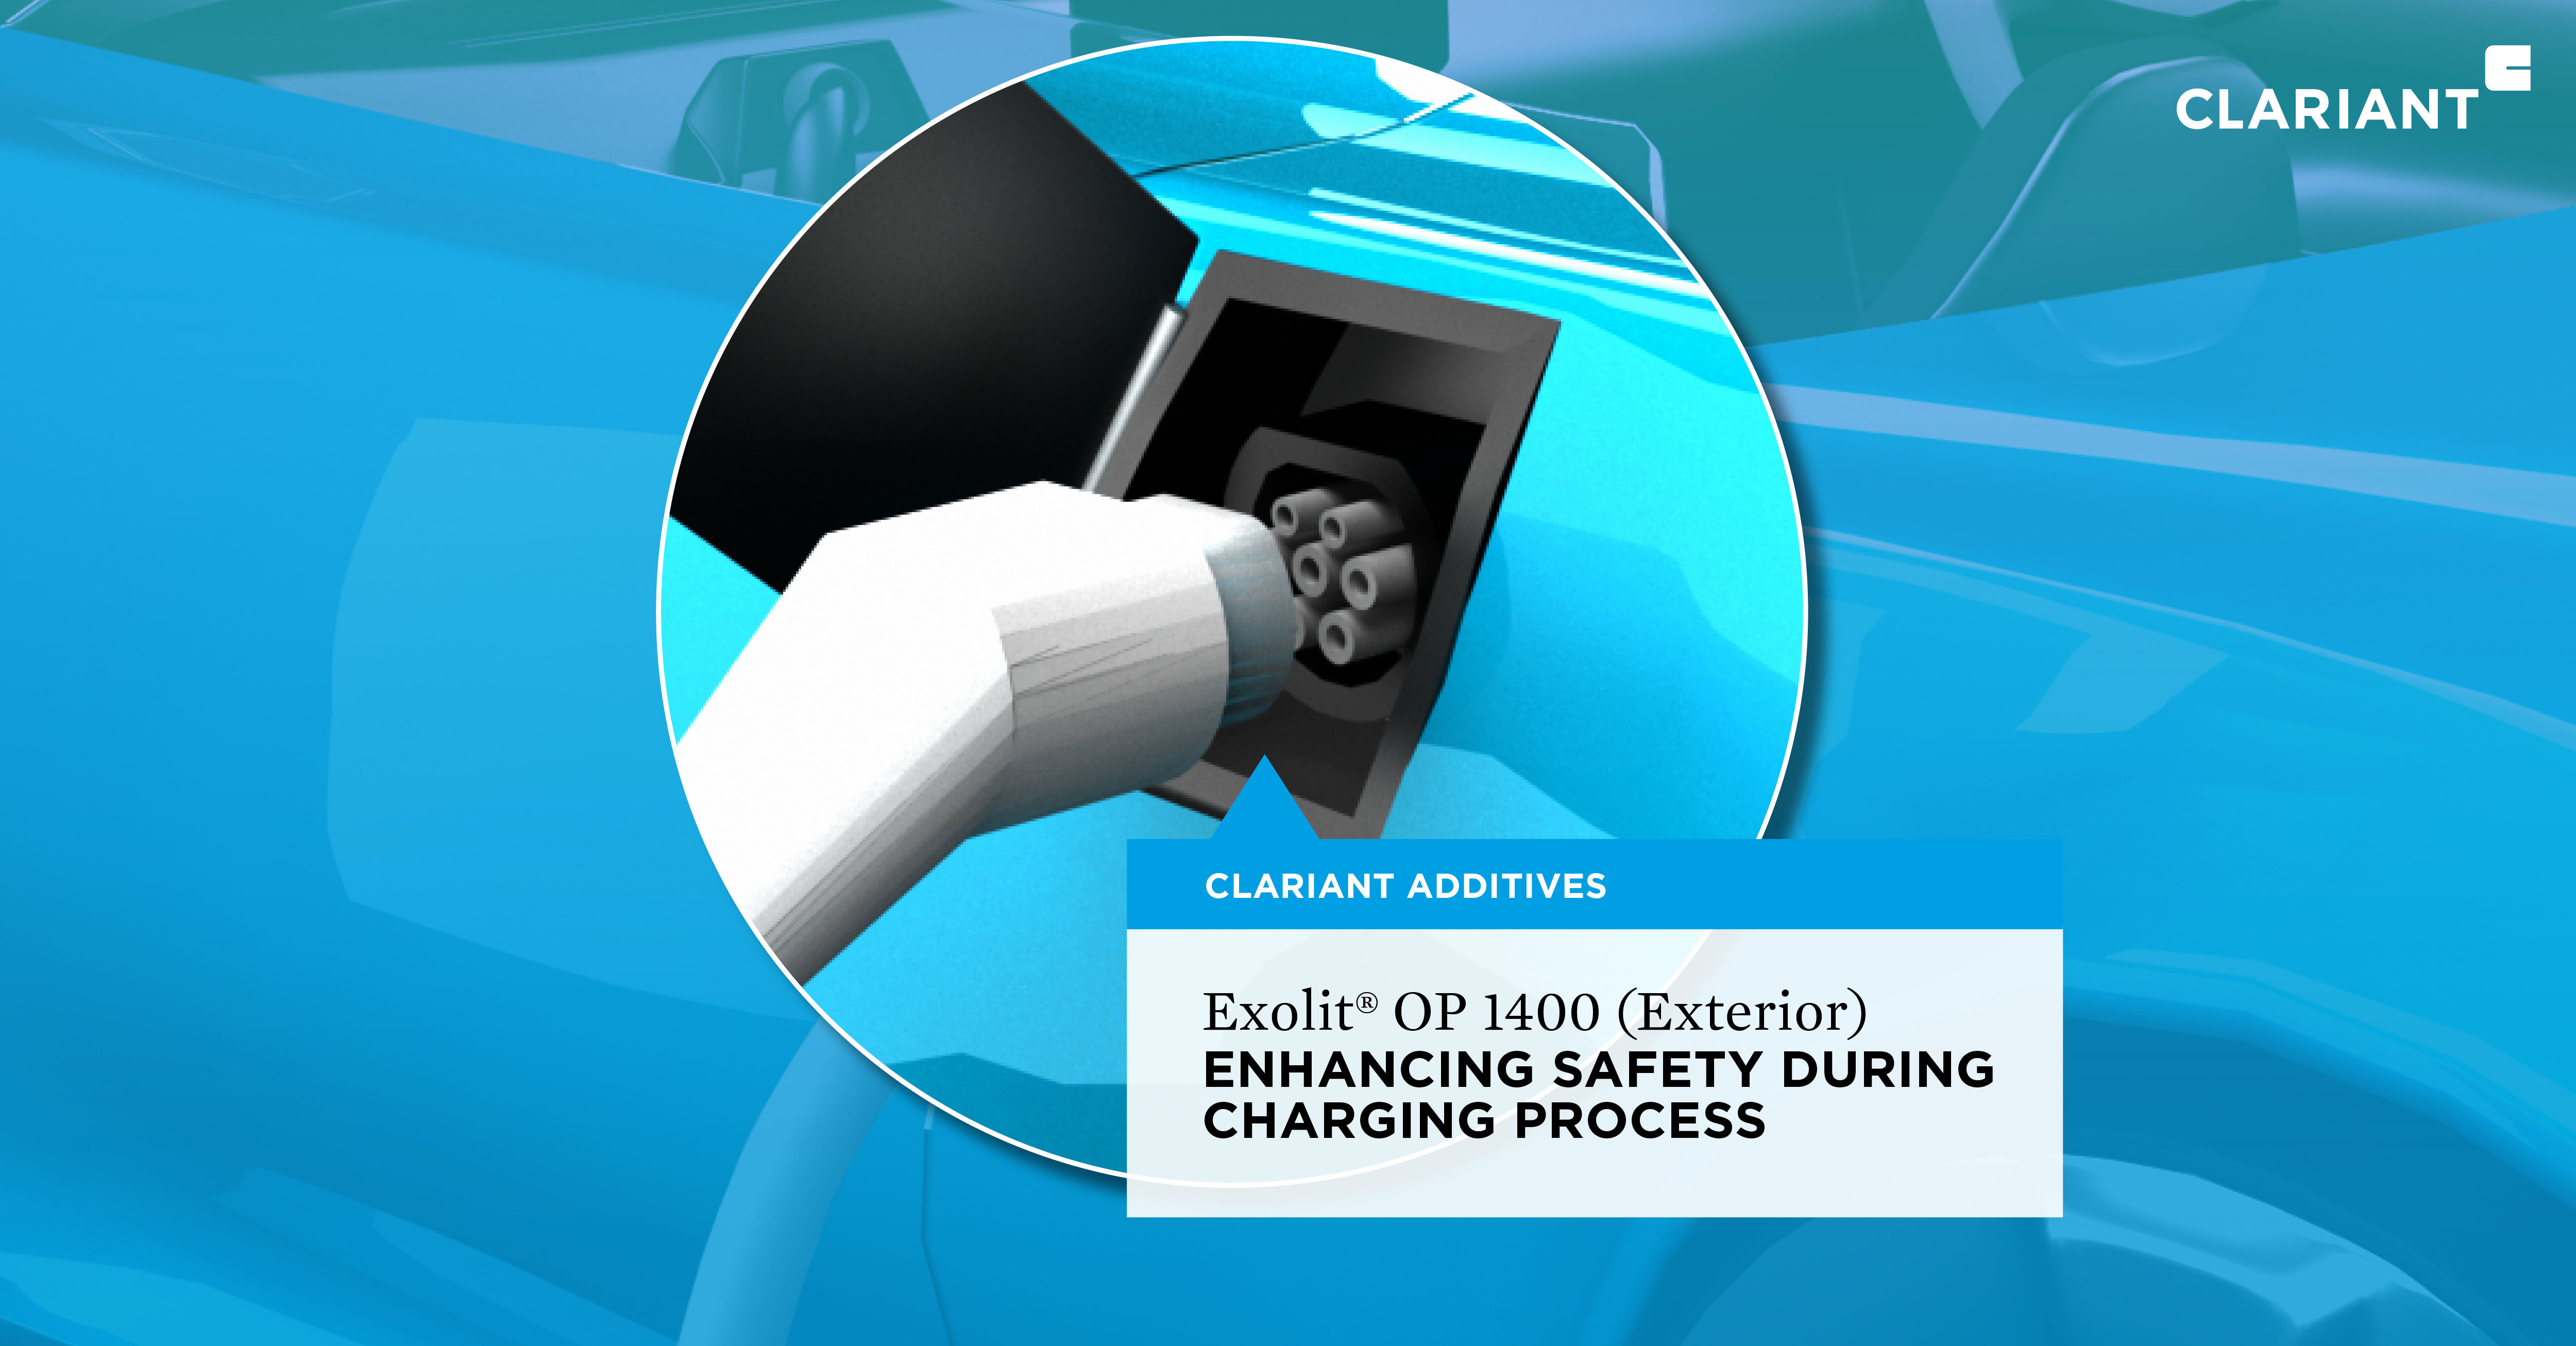 Exolit OP 1400 (Exterior): ENHANCING SAFETY DURING CHARGING PROCESS. (Photo: Clariant)